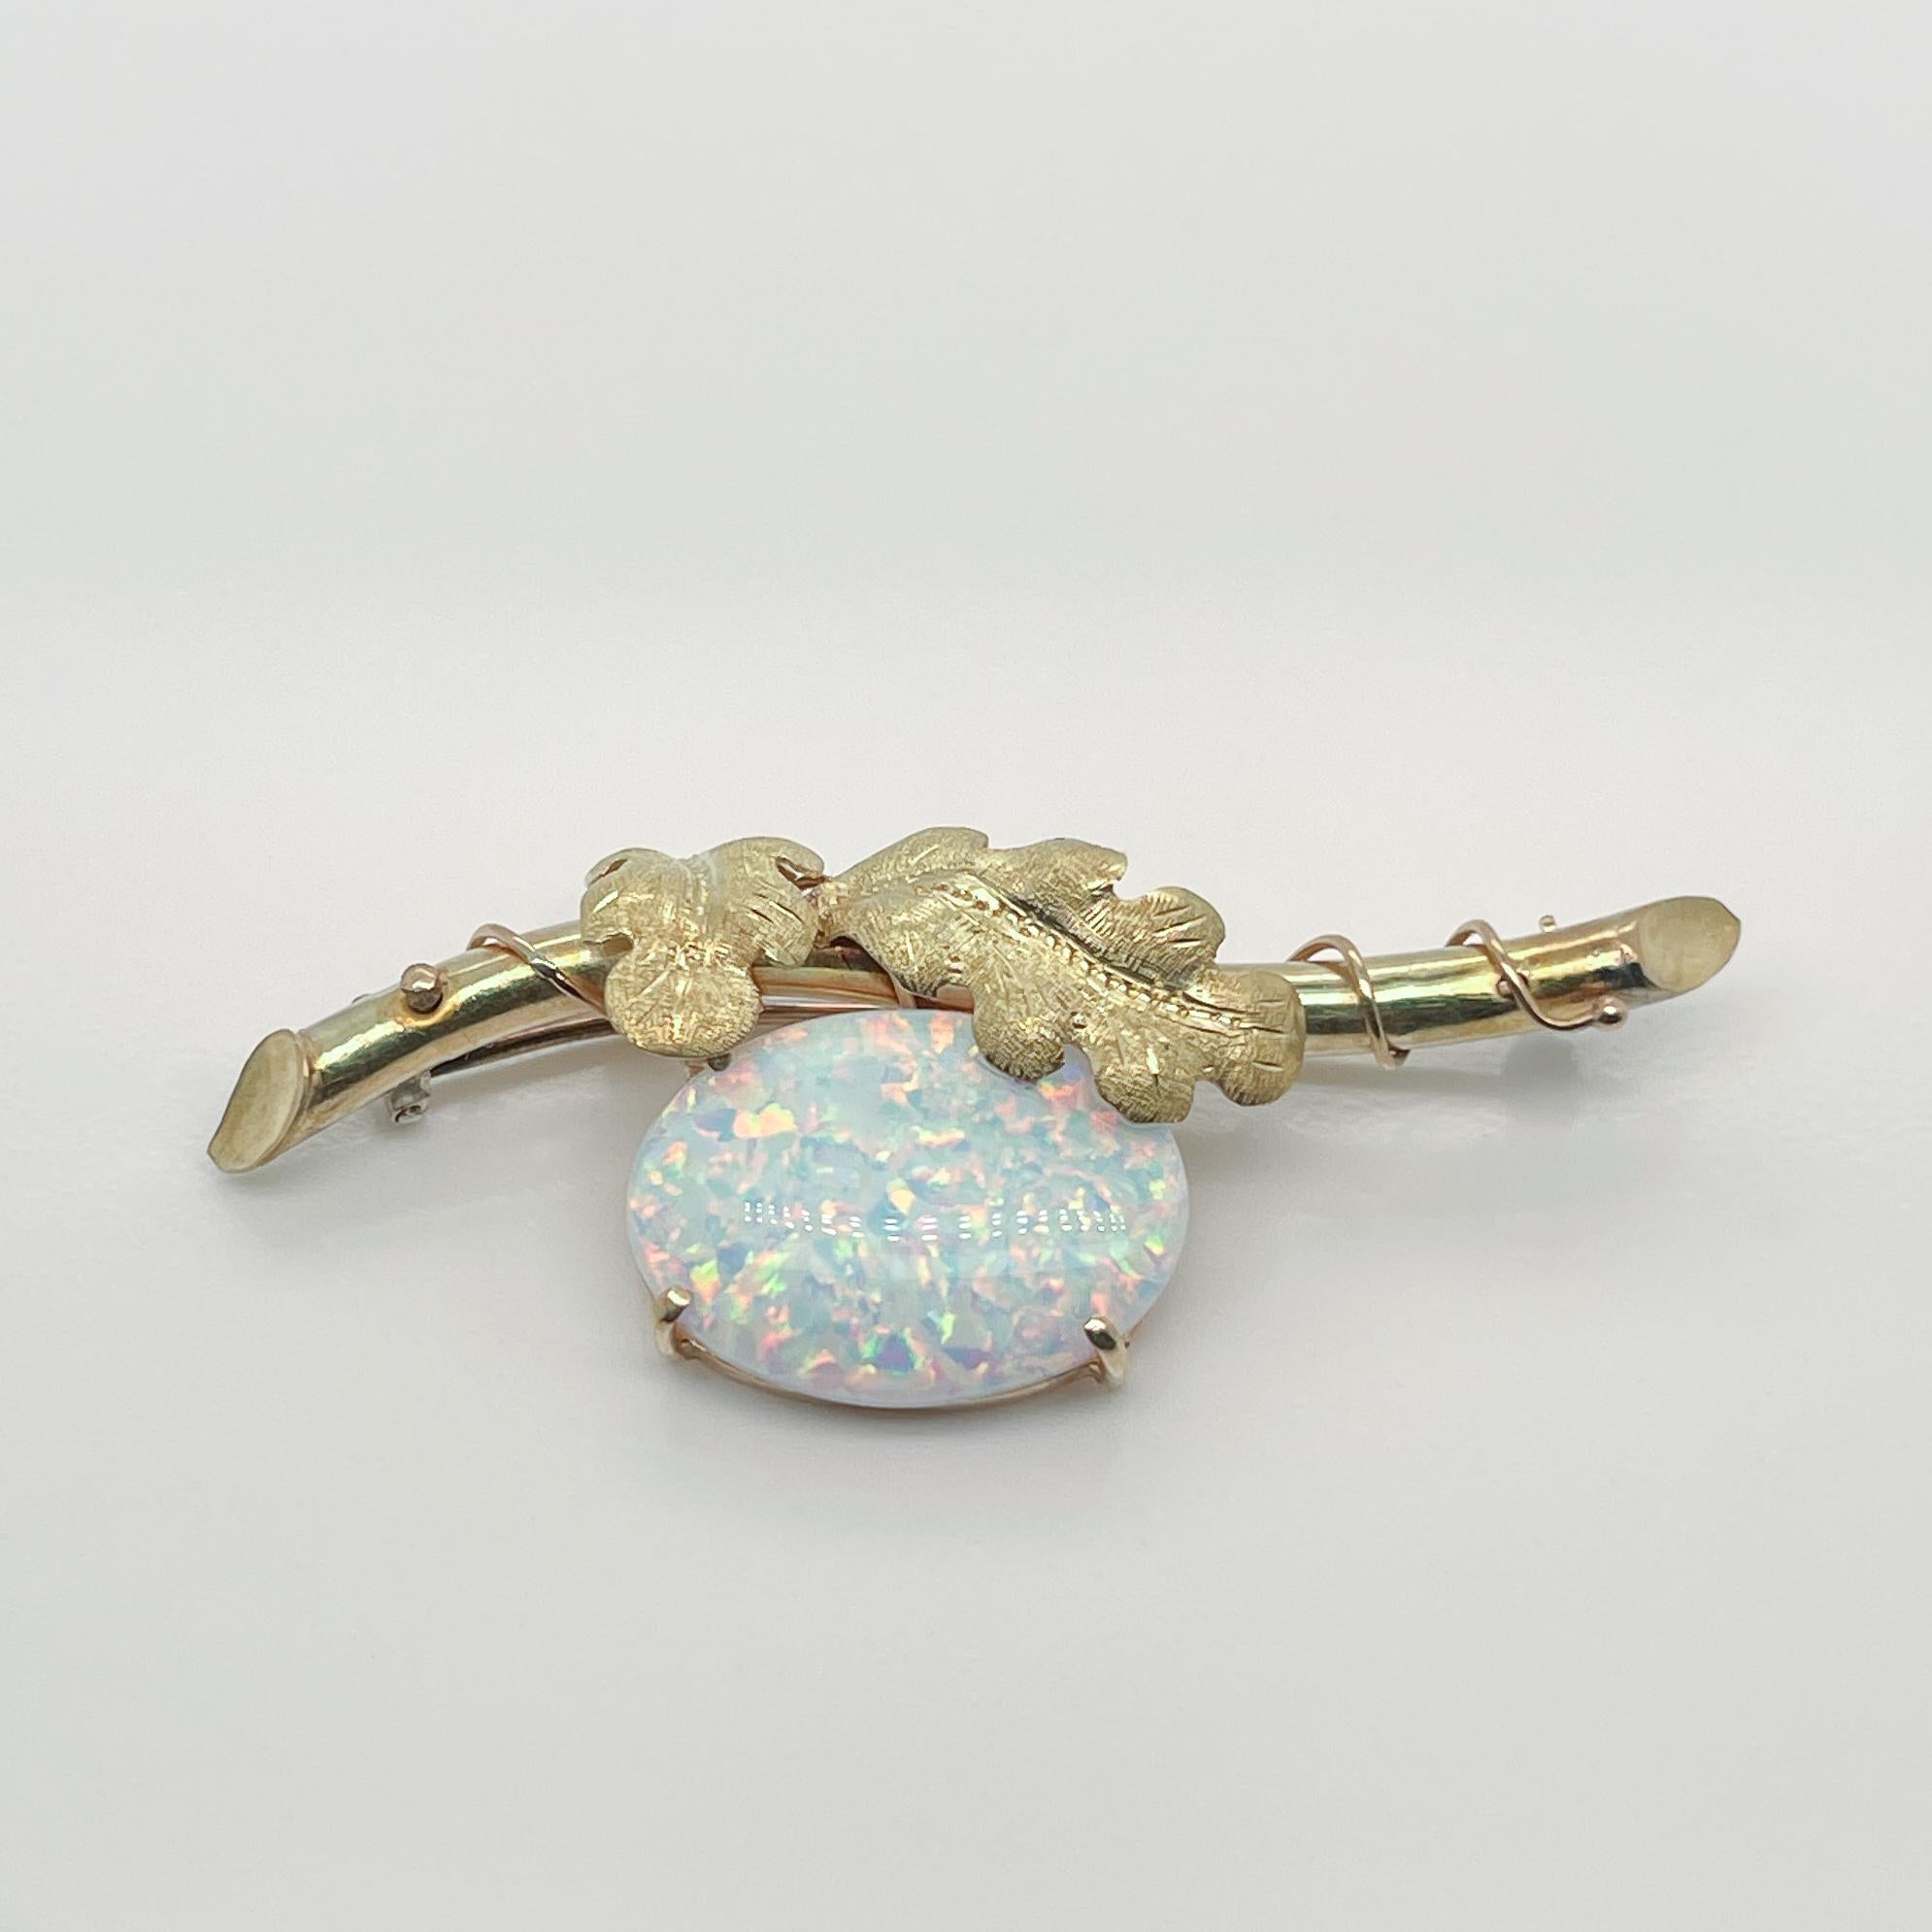 A very fine Edwardian style brooch. 

Prong set with a large reconstituted opal cabochon under an bar in the form of a branch that is wrapped with a vine with engraved and textured leaves.

Simply a wonderful brooch!

Date:
20th Century

Overall